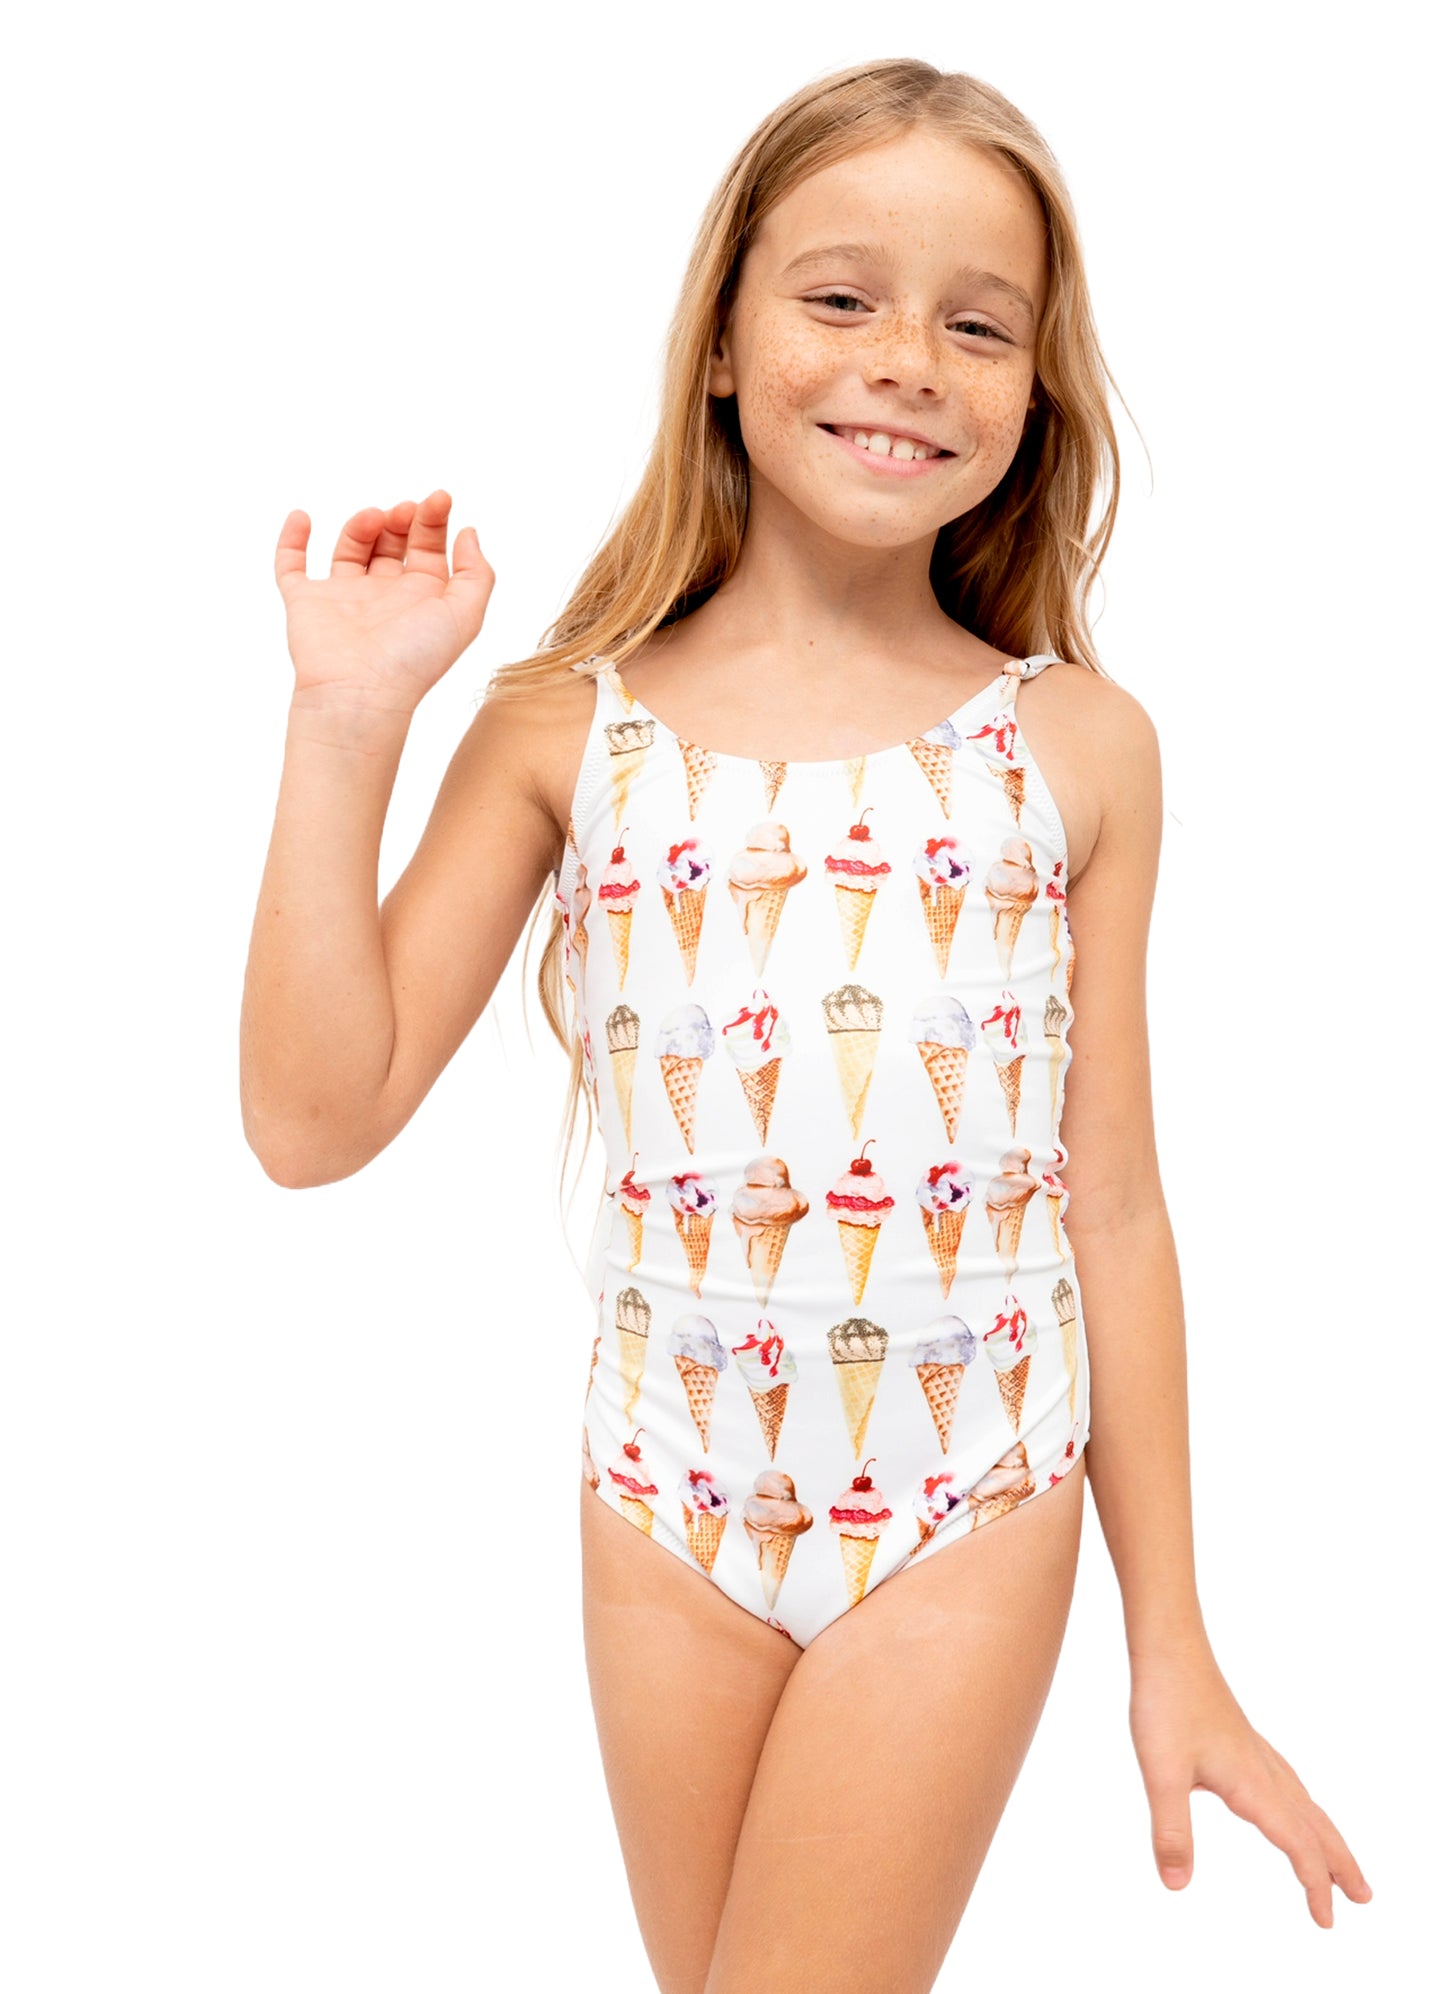 swimsuits for girls, bathing suits for girls